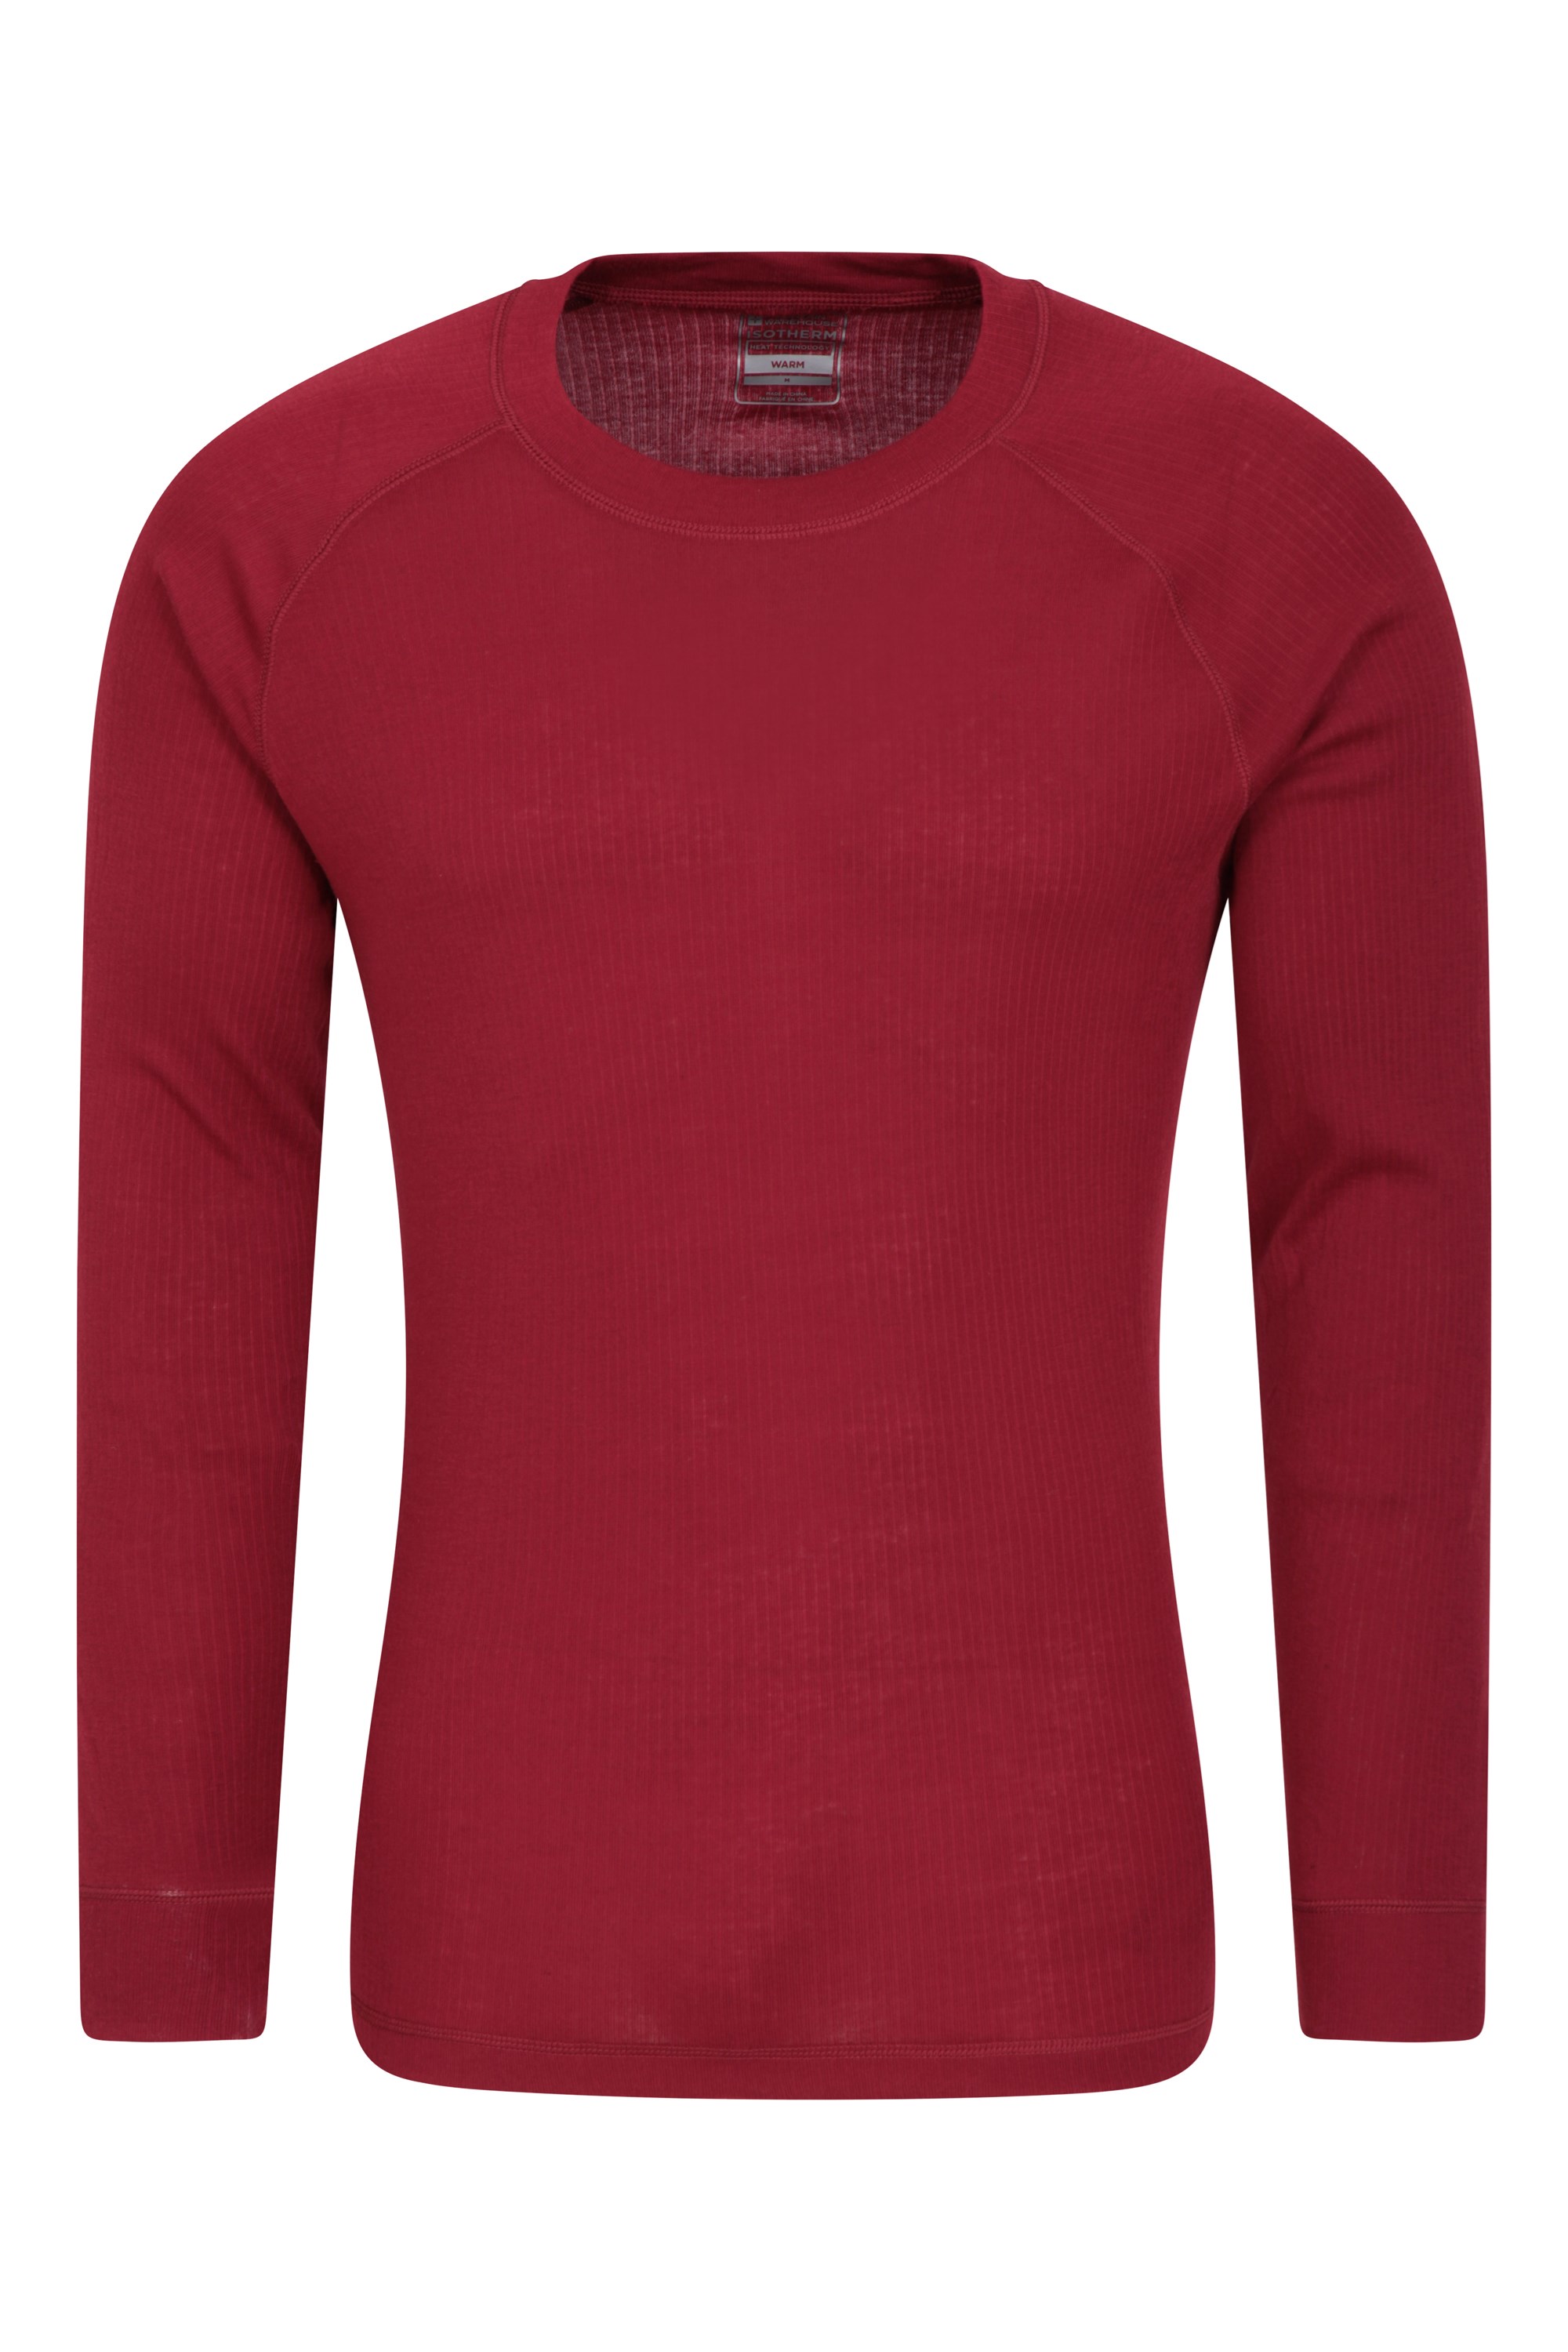 Talus Mens Long Sleeved Round Neck Top - Red